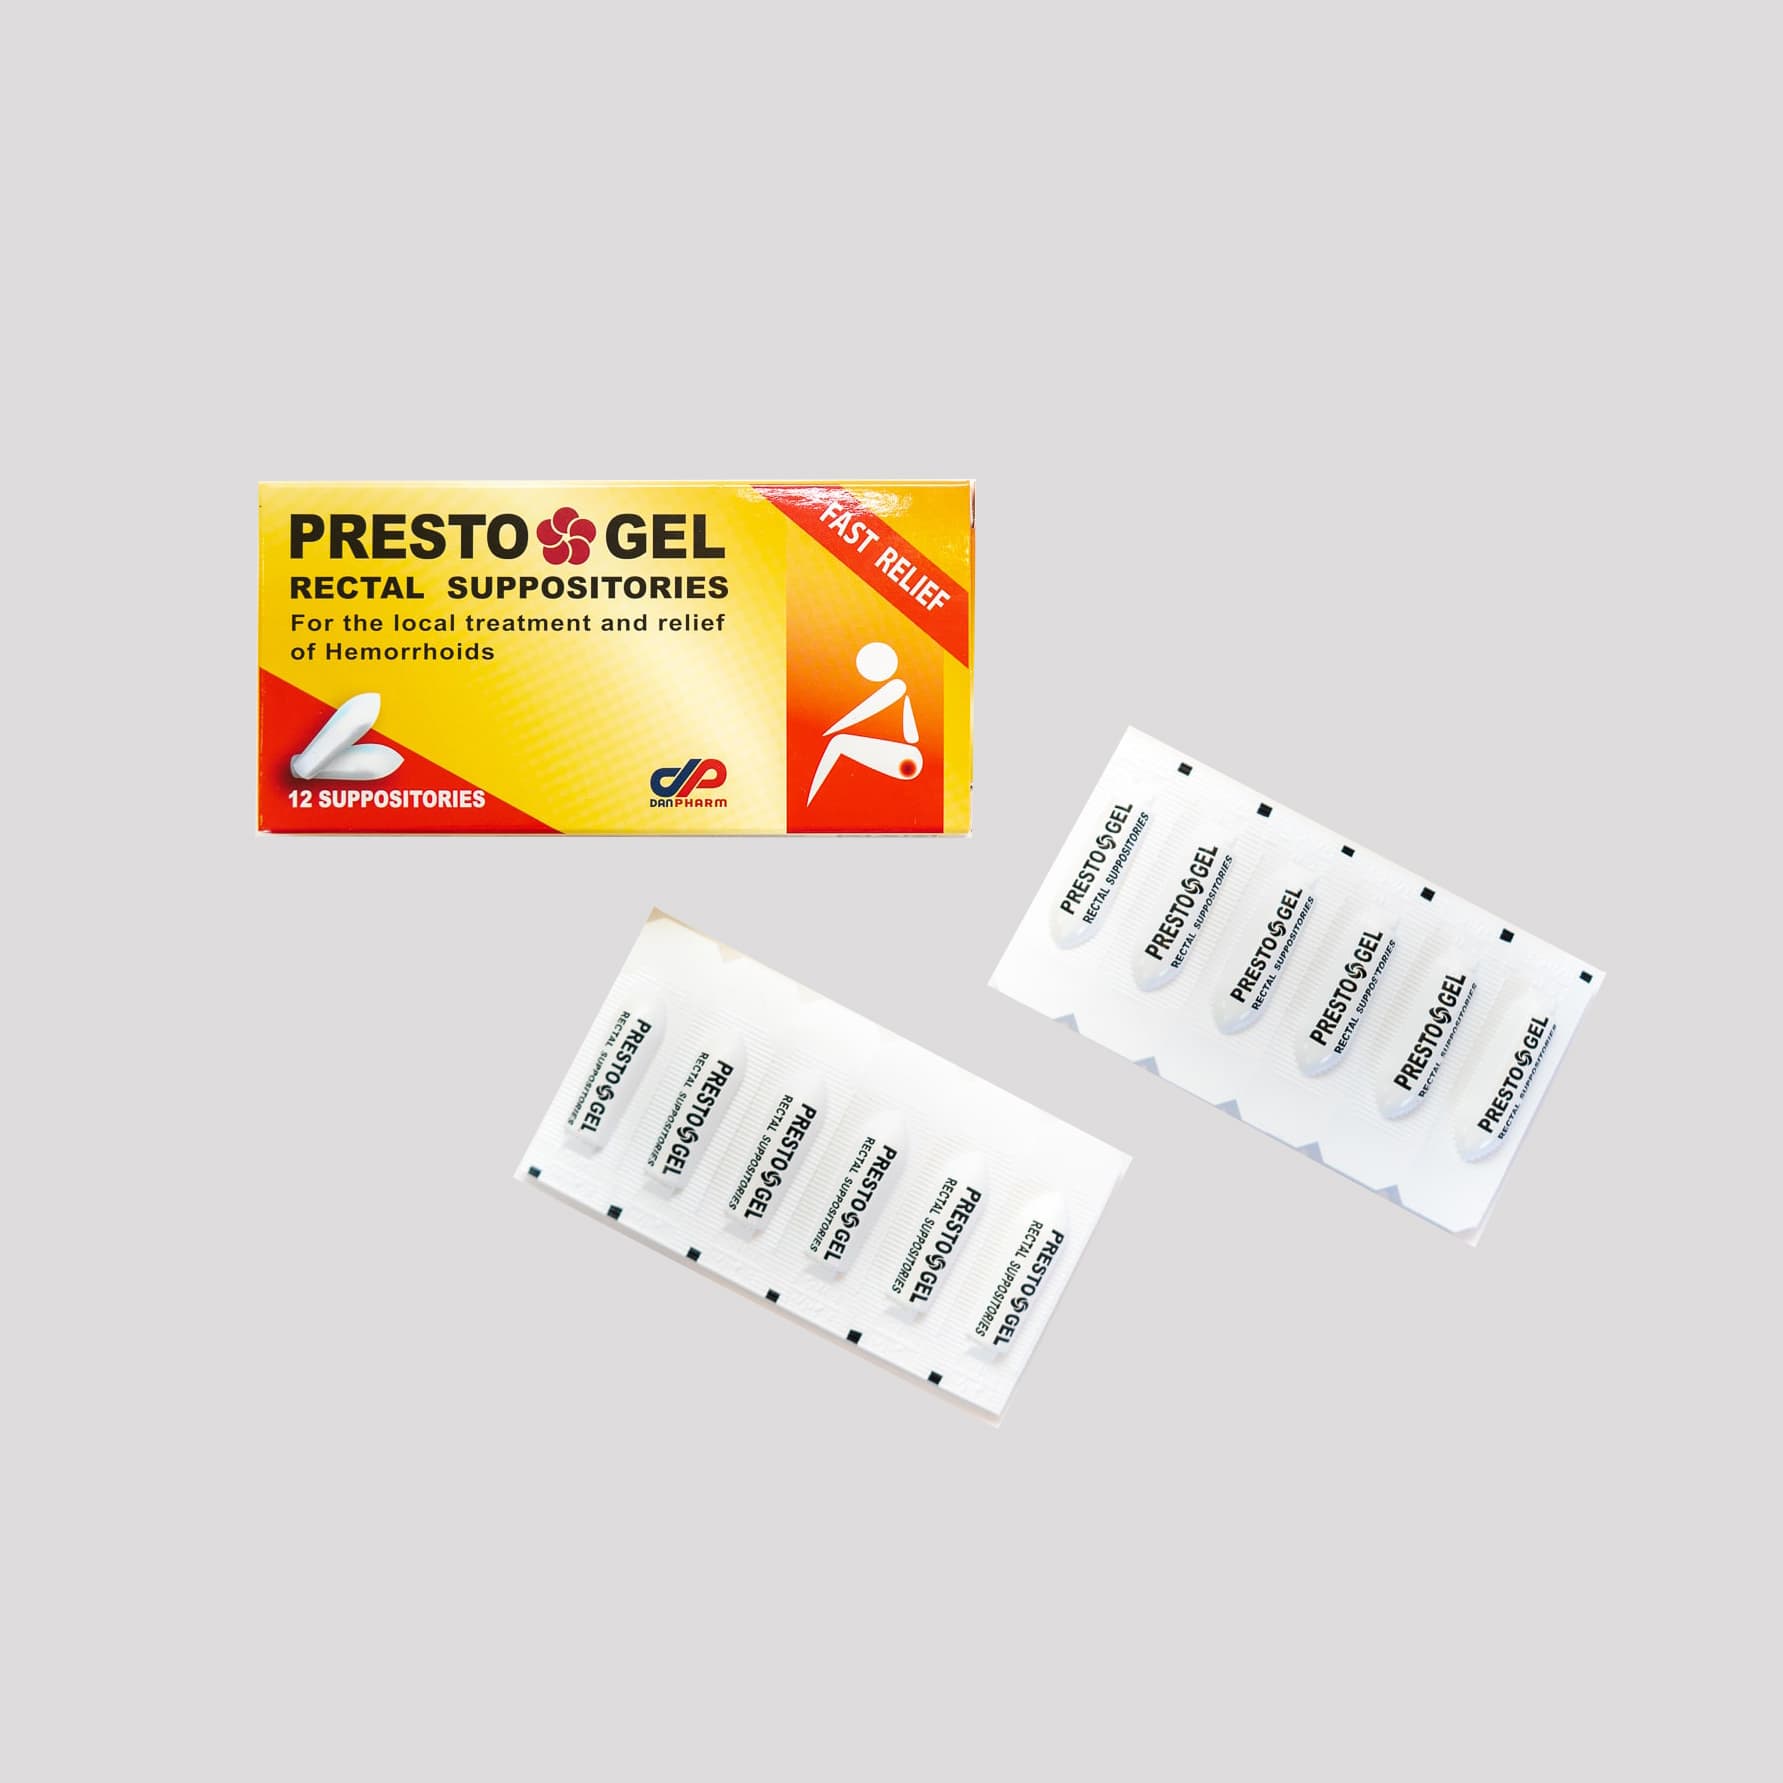 Presto Gel Rectal Suppositories is the perfect hemorrhoids treatment at home for your anal fissure treatment, providing rapid relief in hemorrhoidal conditions.